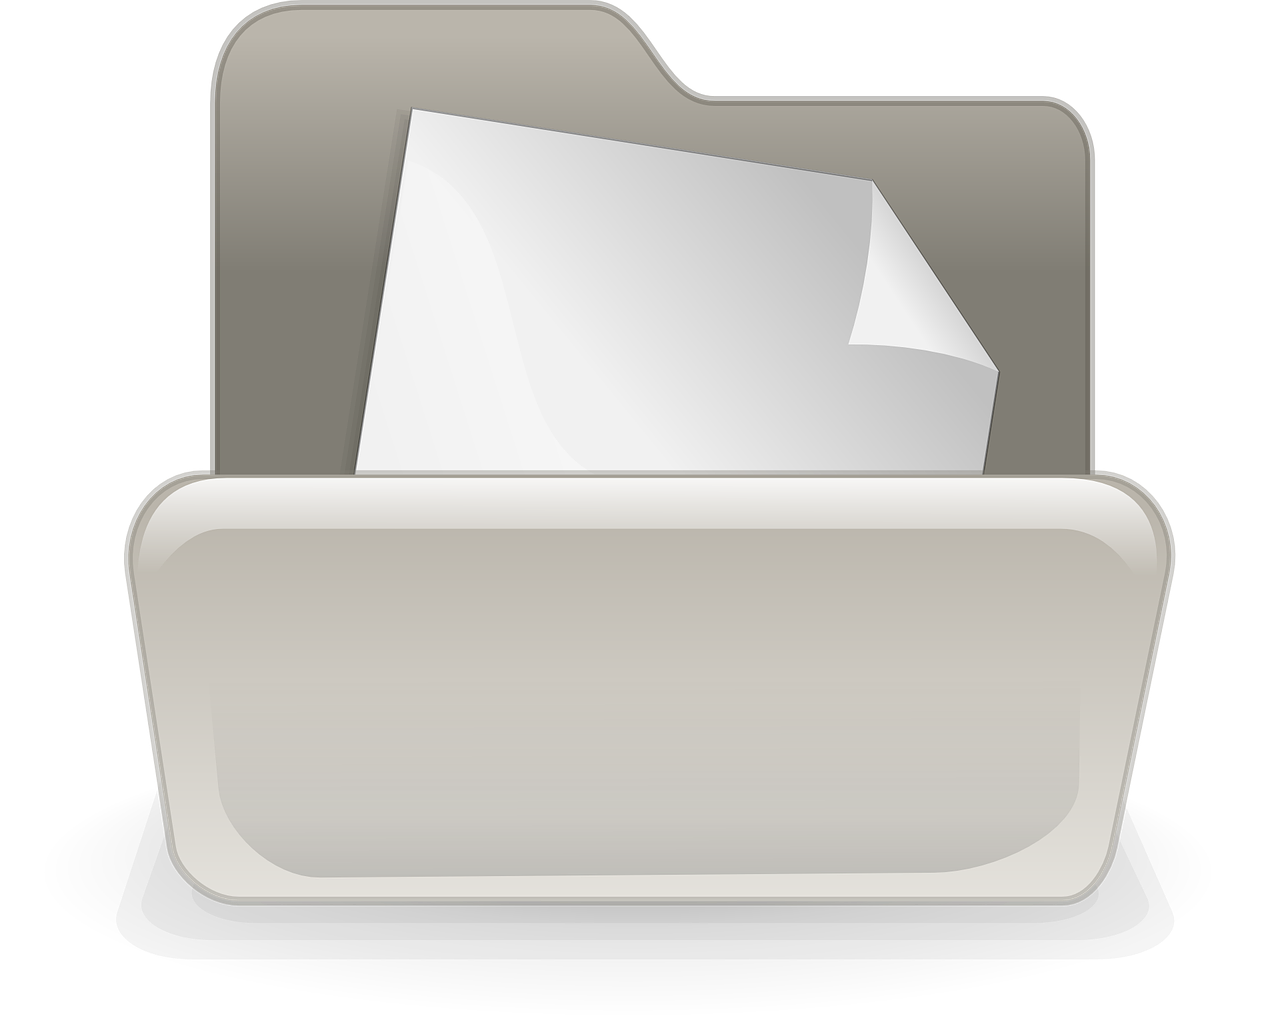 folder,directory,computer,open,documents,save,store,data,files,free vector graphics,free pictures, free photos, free images, royalty free, free illustrations, public domain